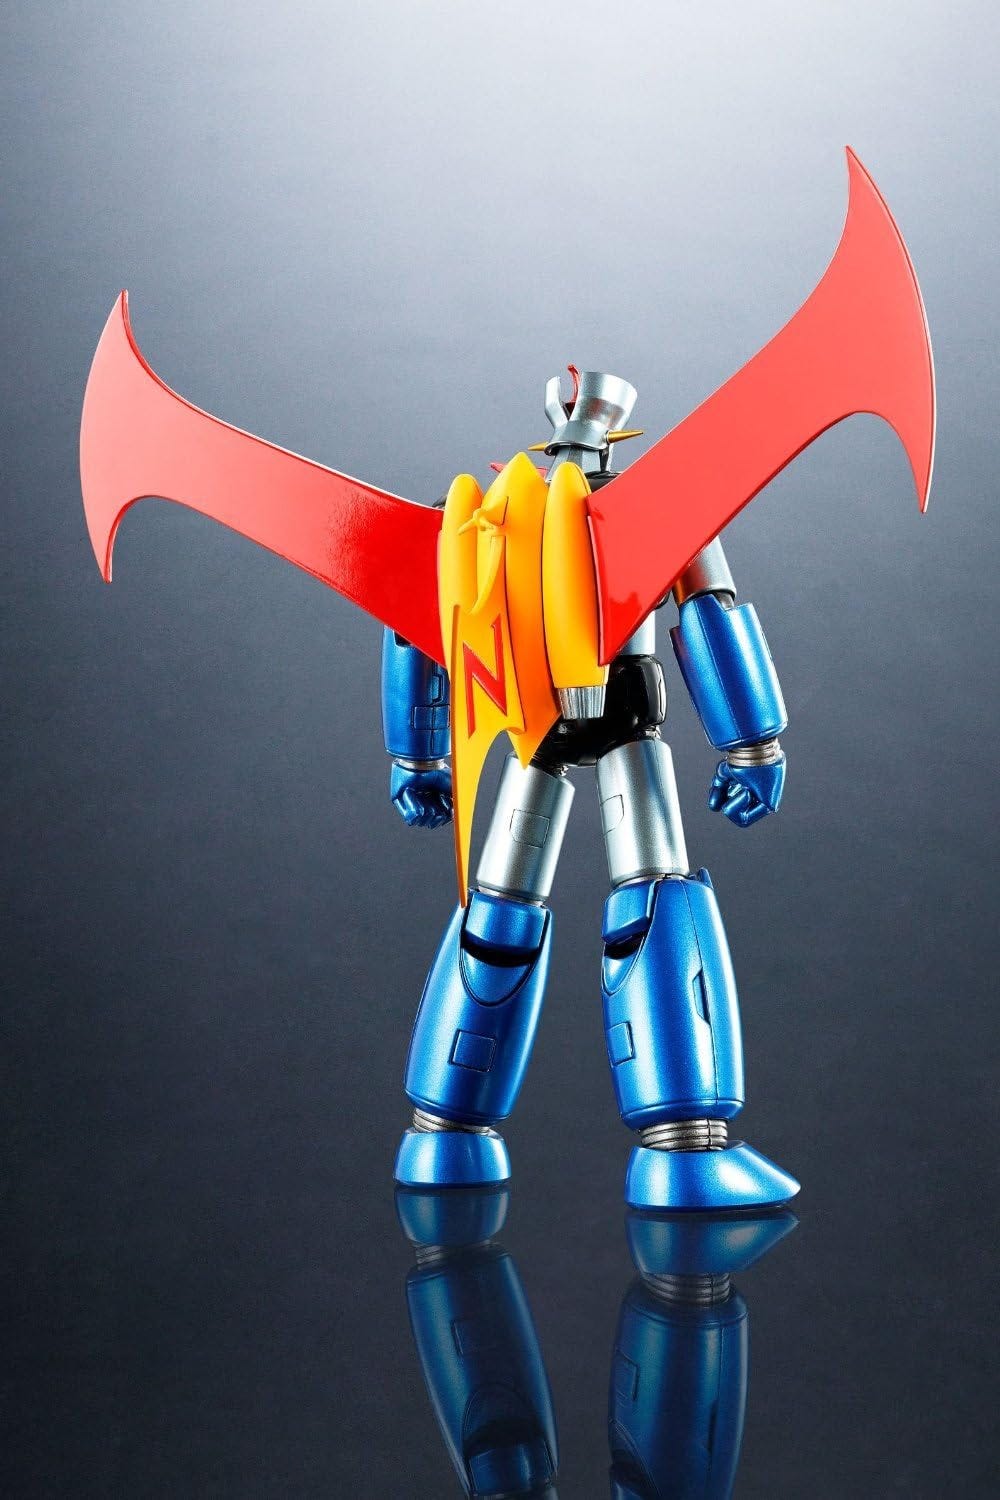 Reverse image of Mazinger Z ‘Iron Cutter’ edition action figure in a relaxed stance with hands down at its sides. The full scrander is visible.